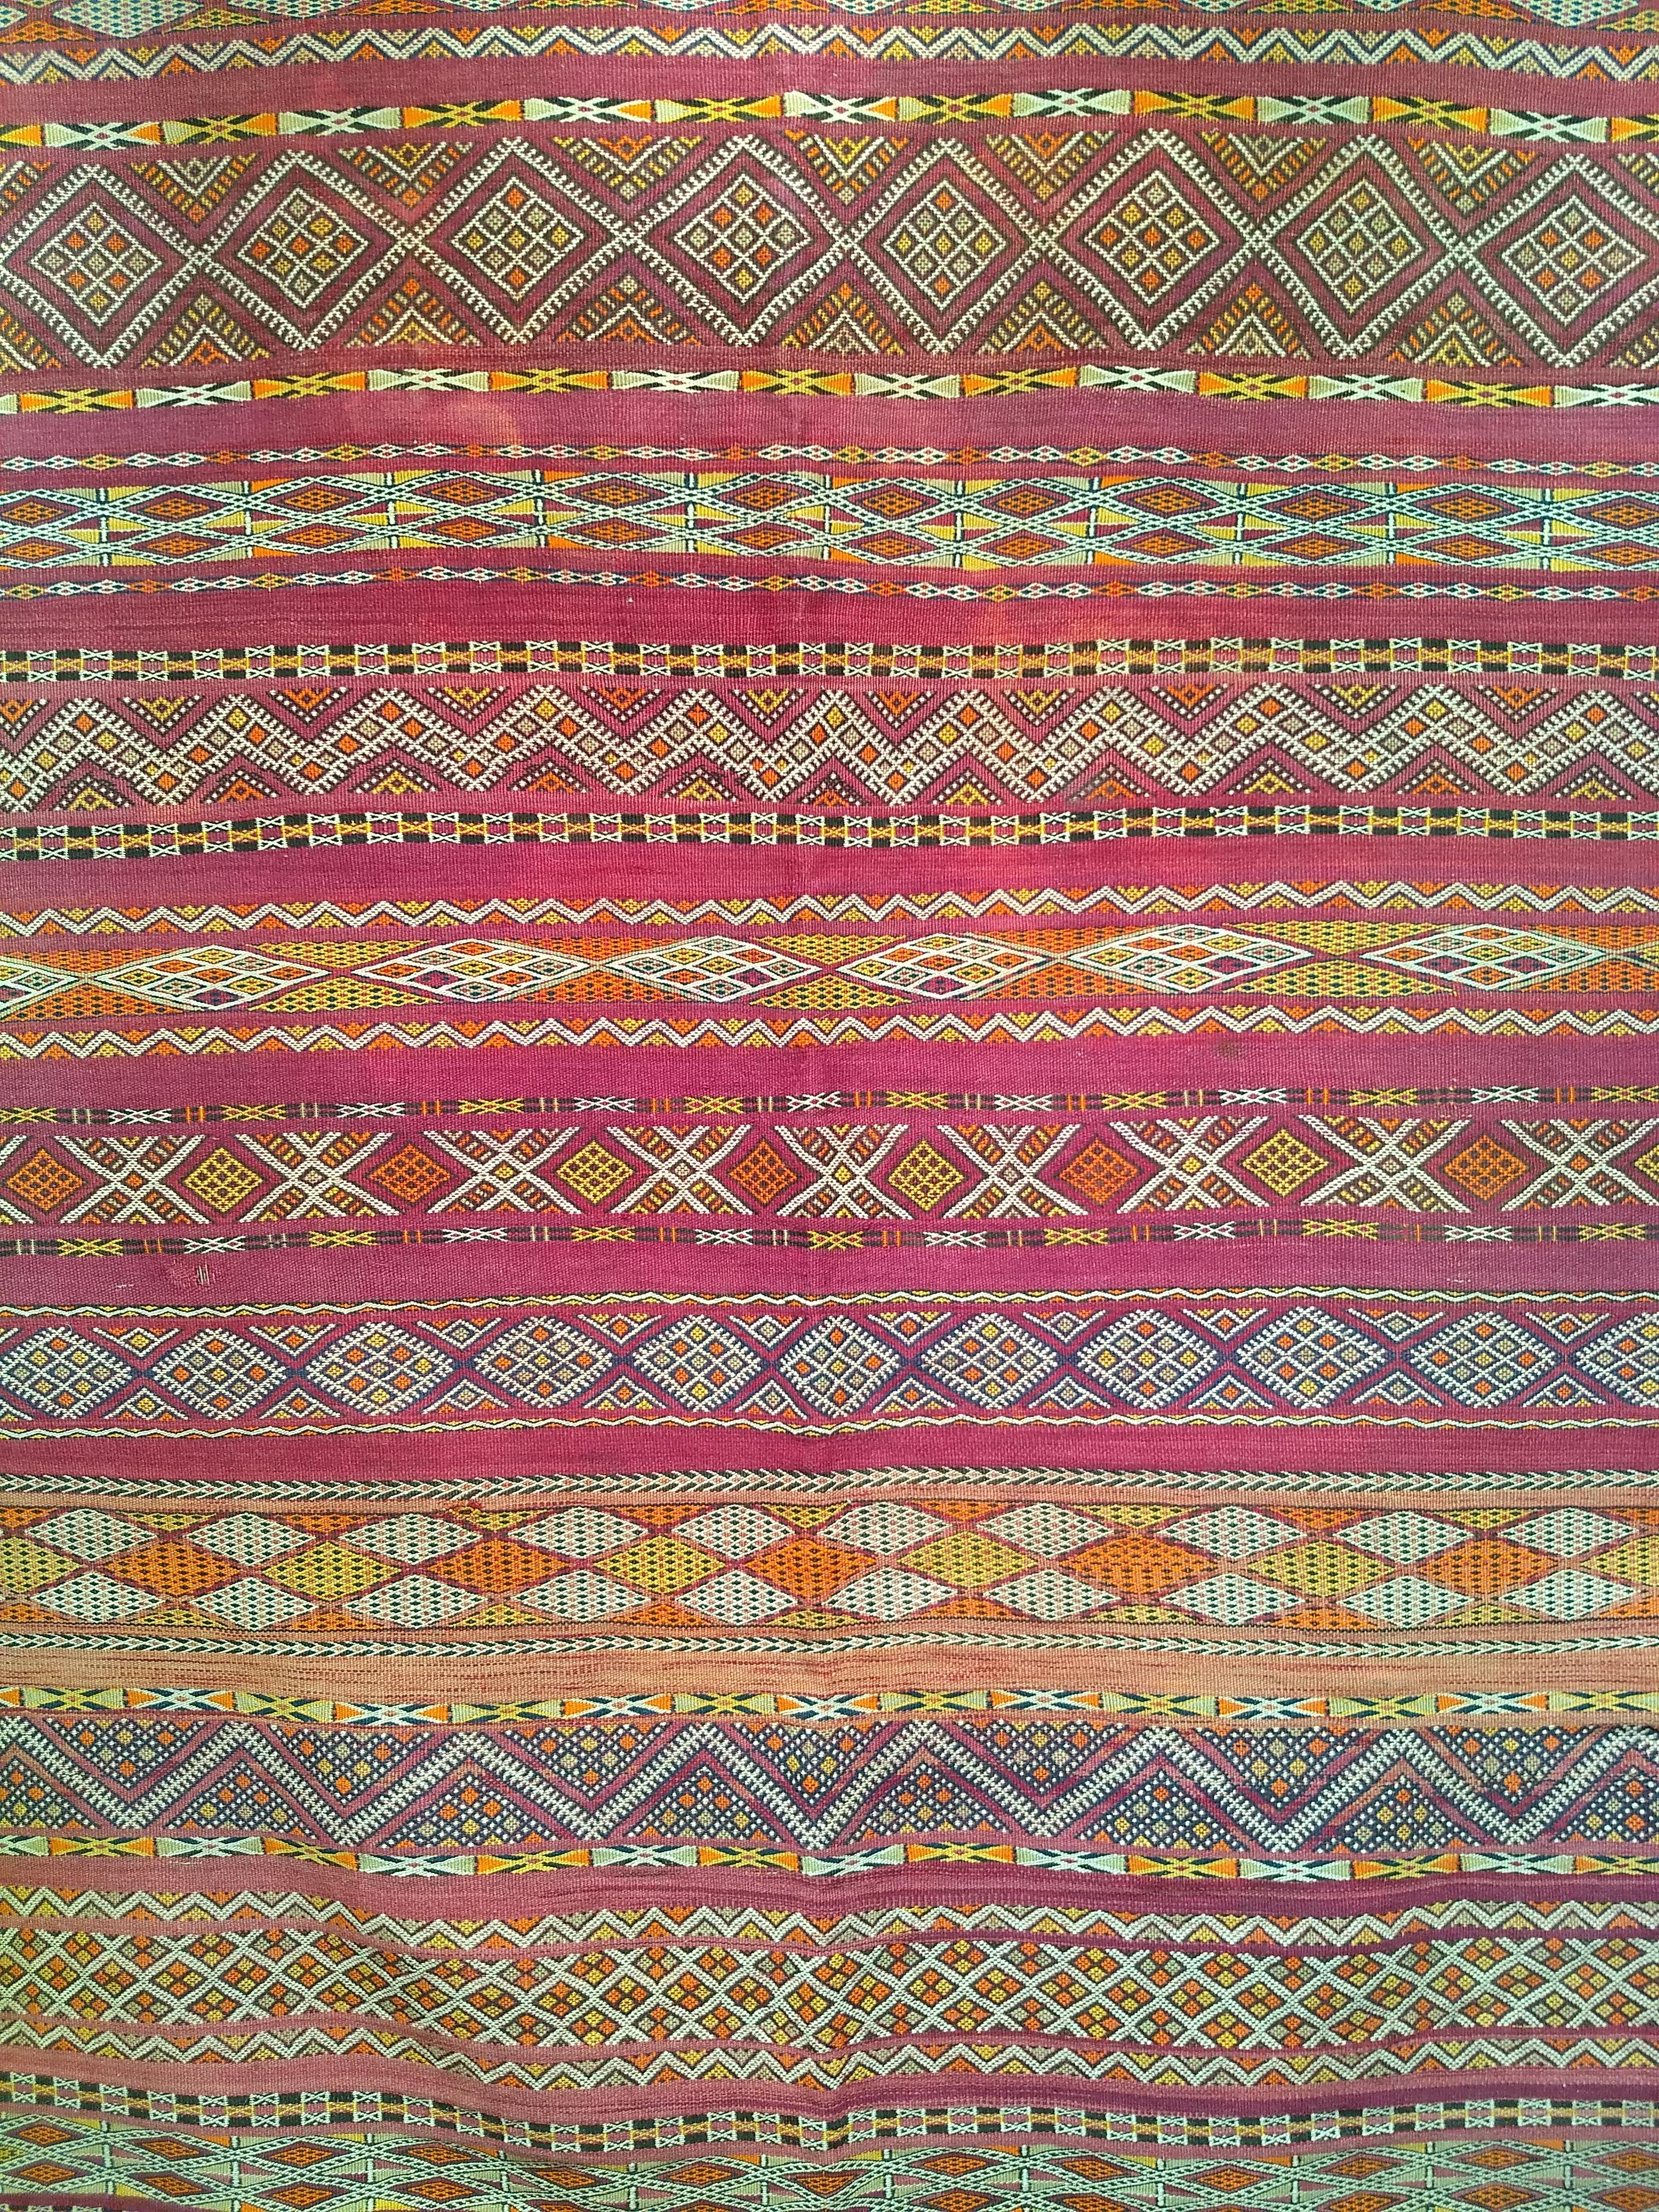 Beautiful and colorful vintage Moroccan kilim with multiple stripes with various detailed geometric designs in each band.   The range of colors in the Moroccan kilim includes purple, red, yellow, and ivory.   The size of the rug makes it ideal